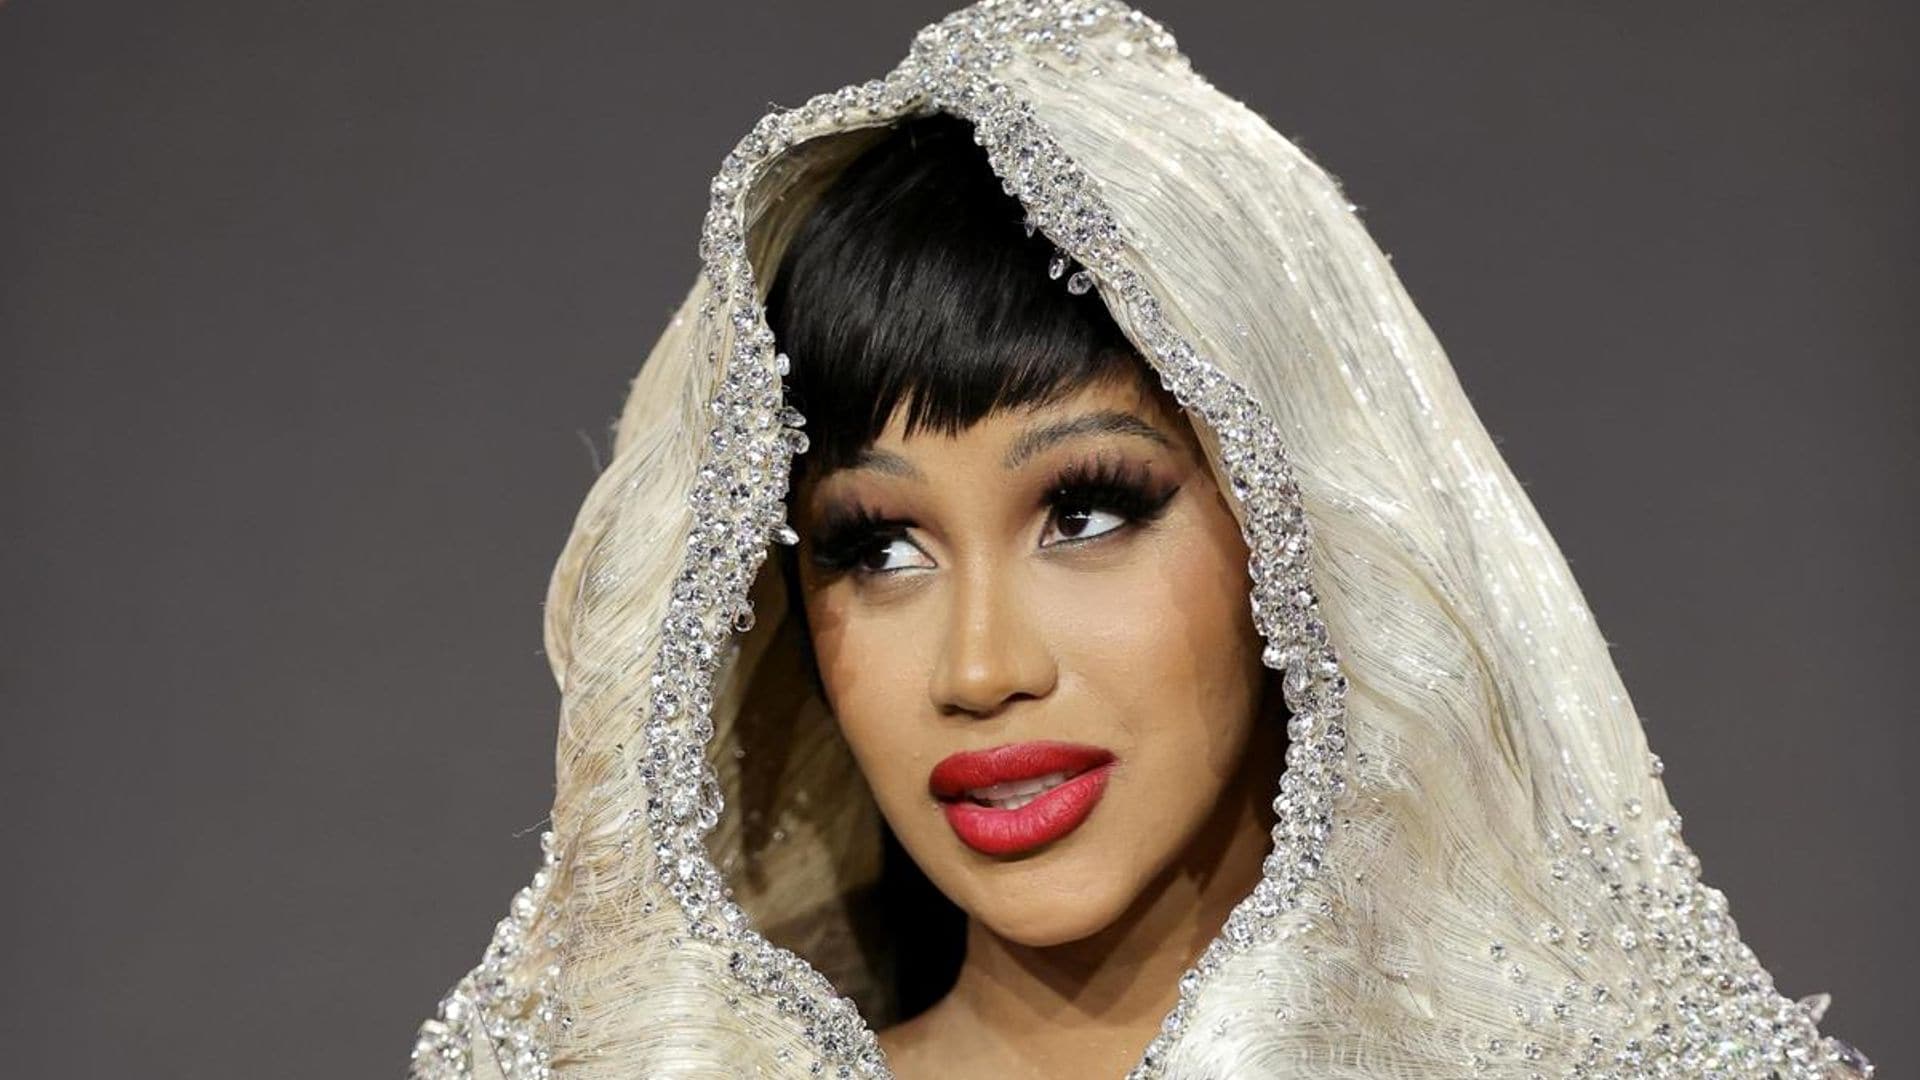 Cardi B’s busy schedule conflicts with her lead role debut in ‘Assisted Living’